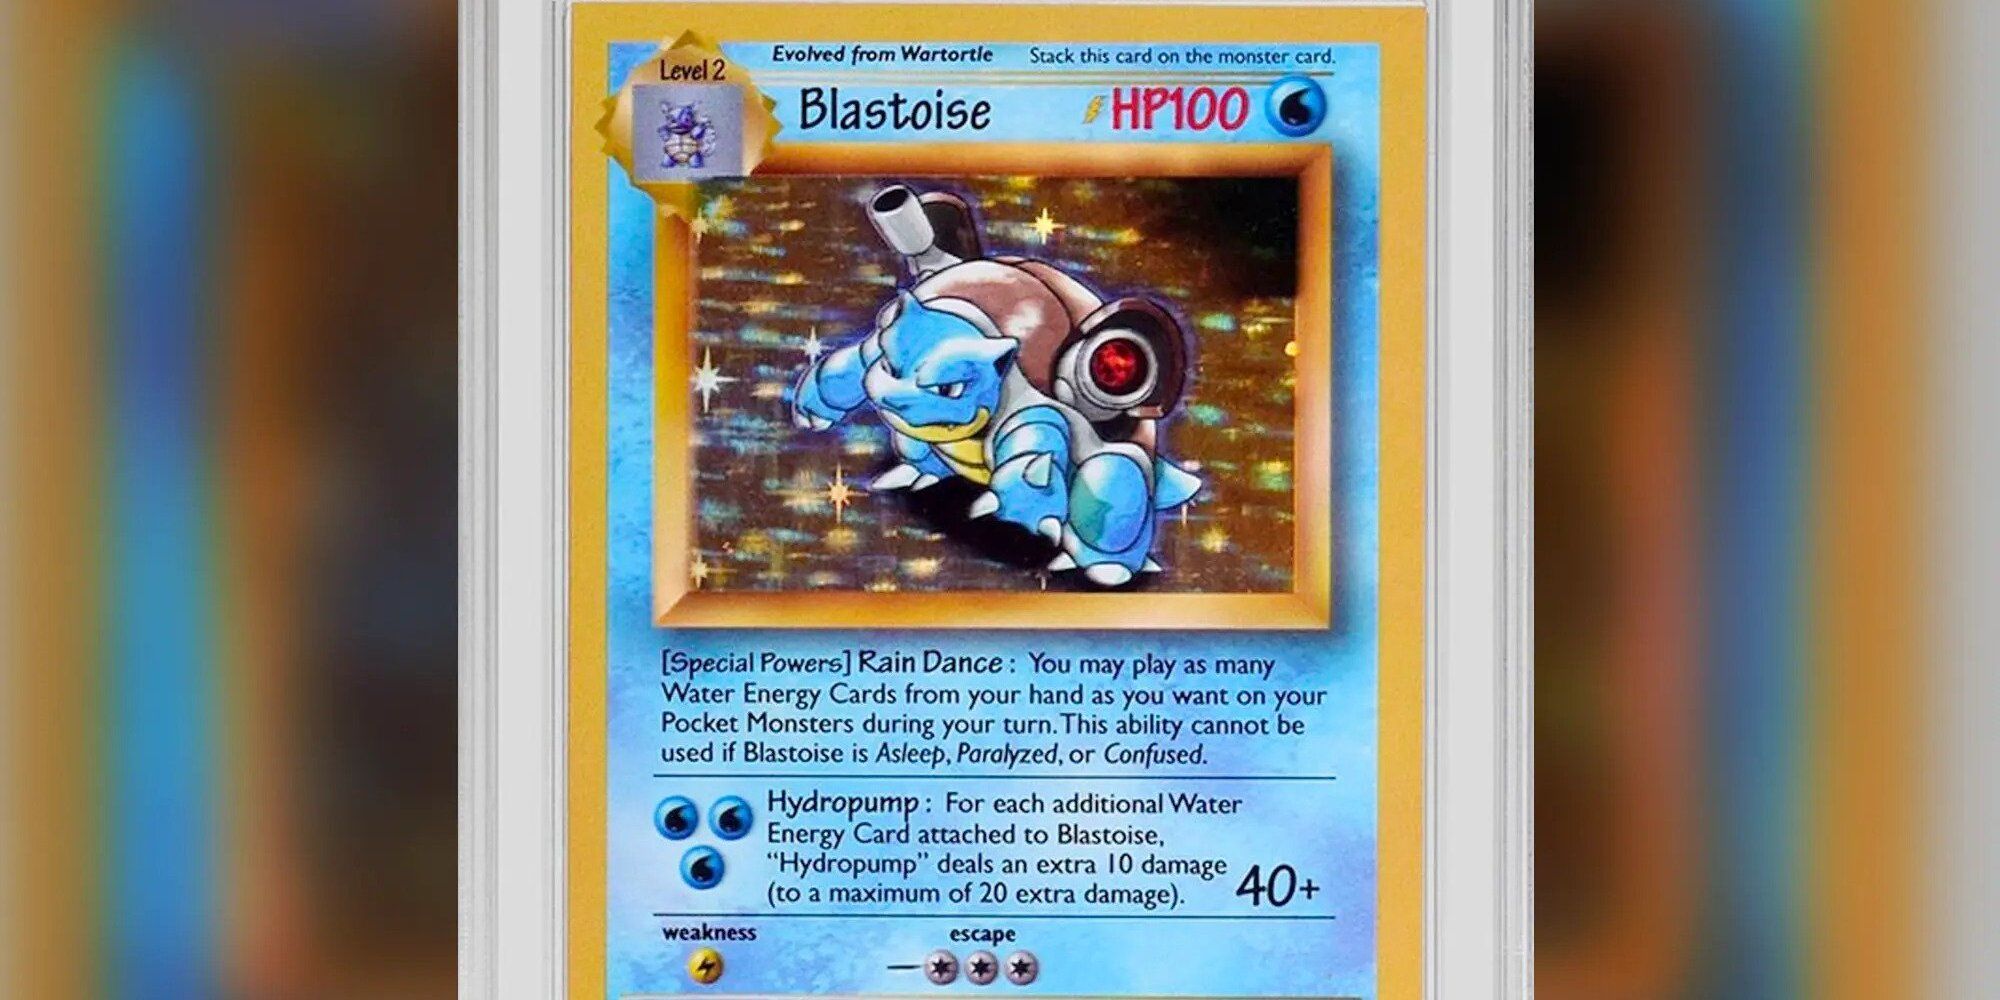 A cope of the Prototype Blastoise card without a rating